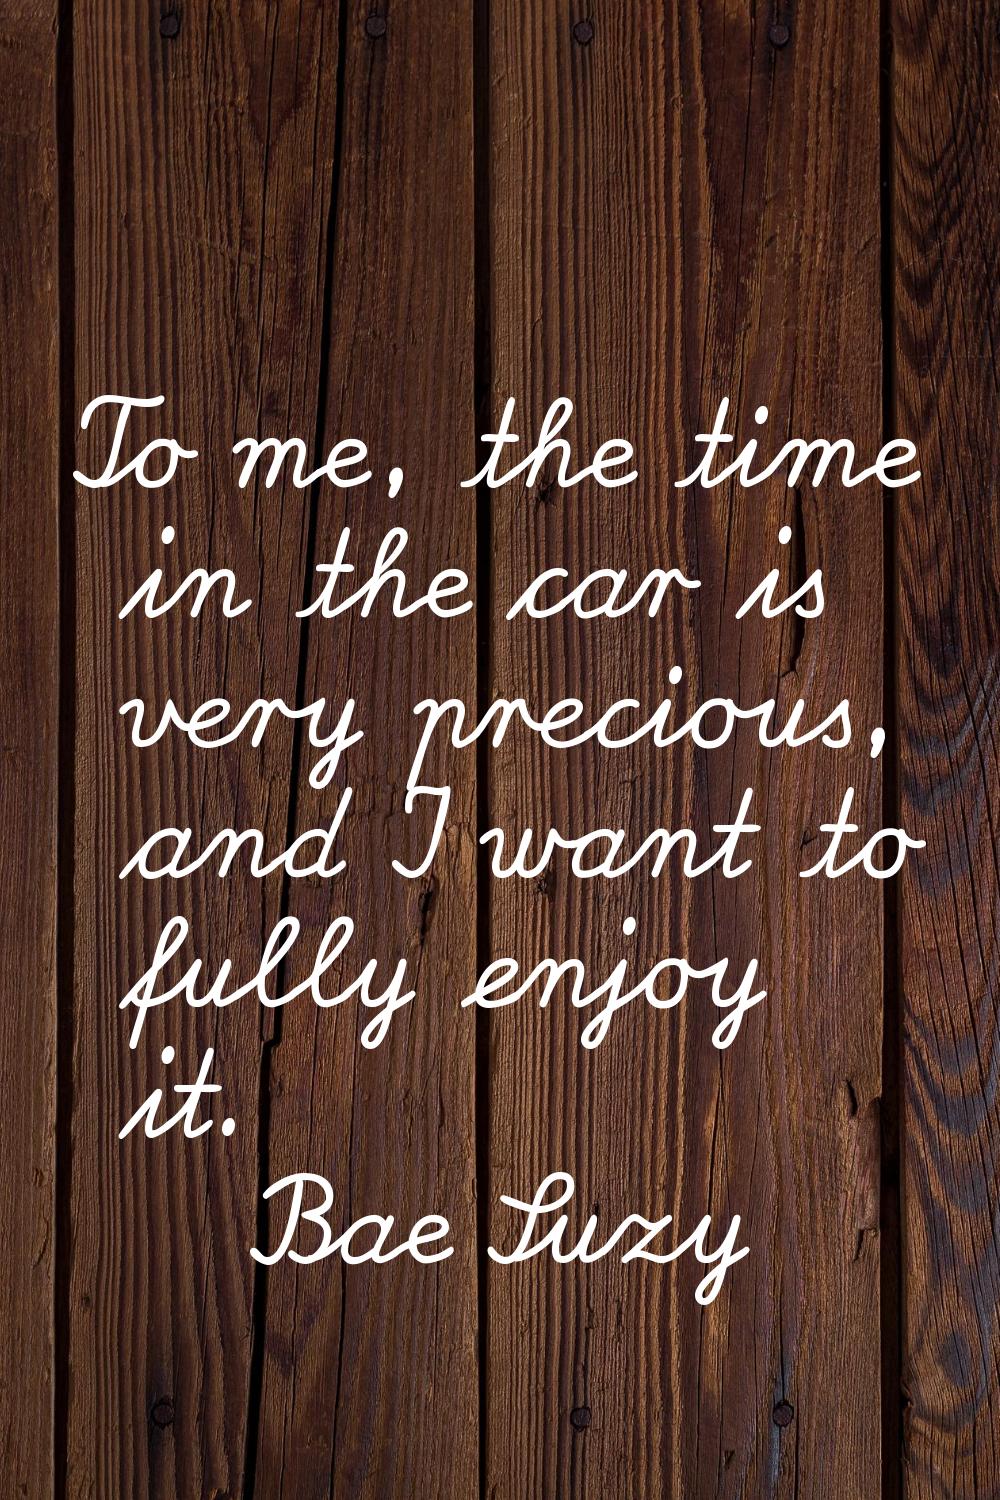 To me, the time in the car is very precious, and I want to fully enjoy it.